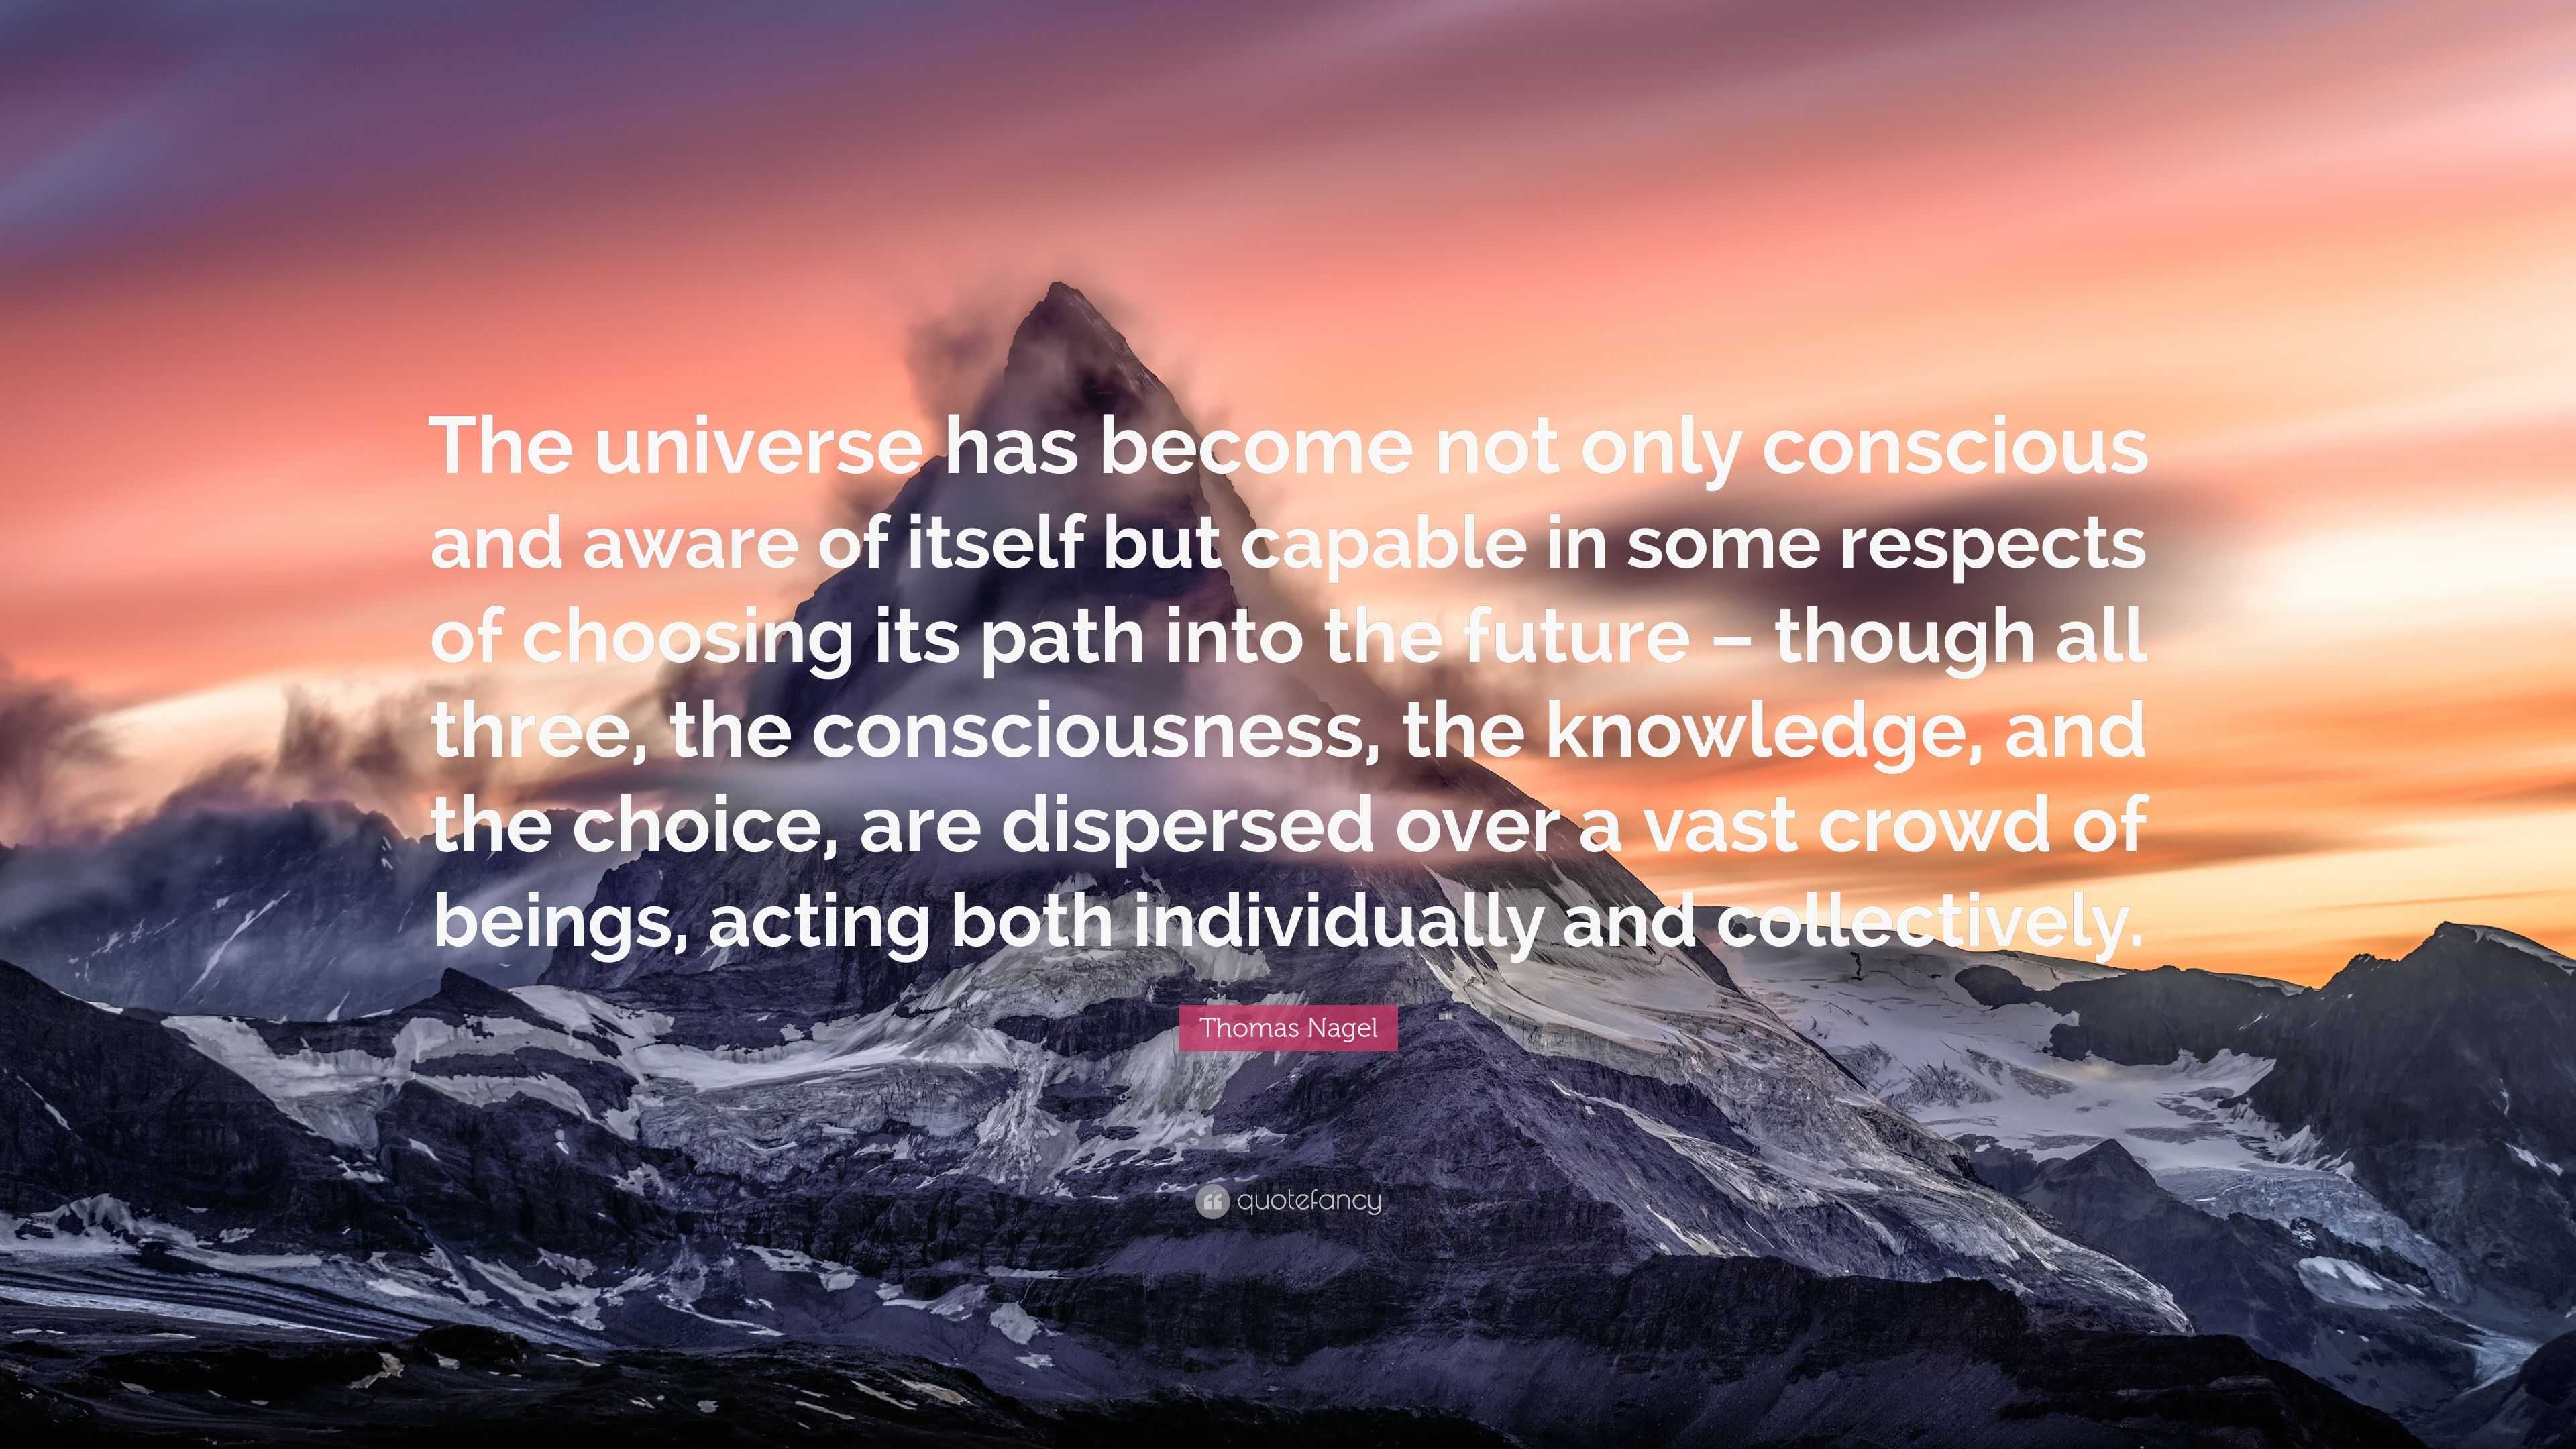 Thomas Nagel Quote: “The universe has become not only conscious and ...